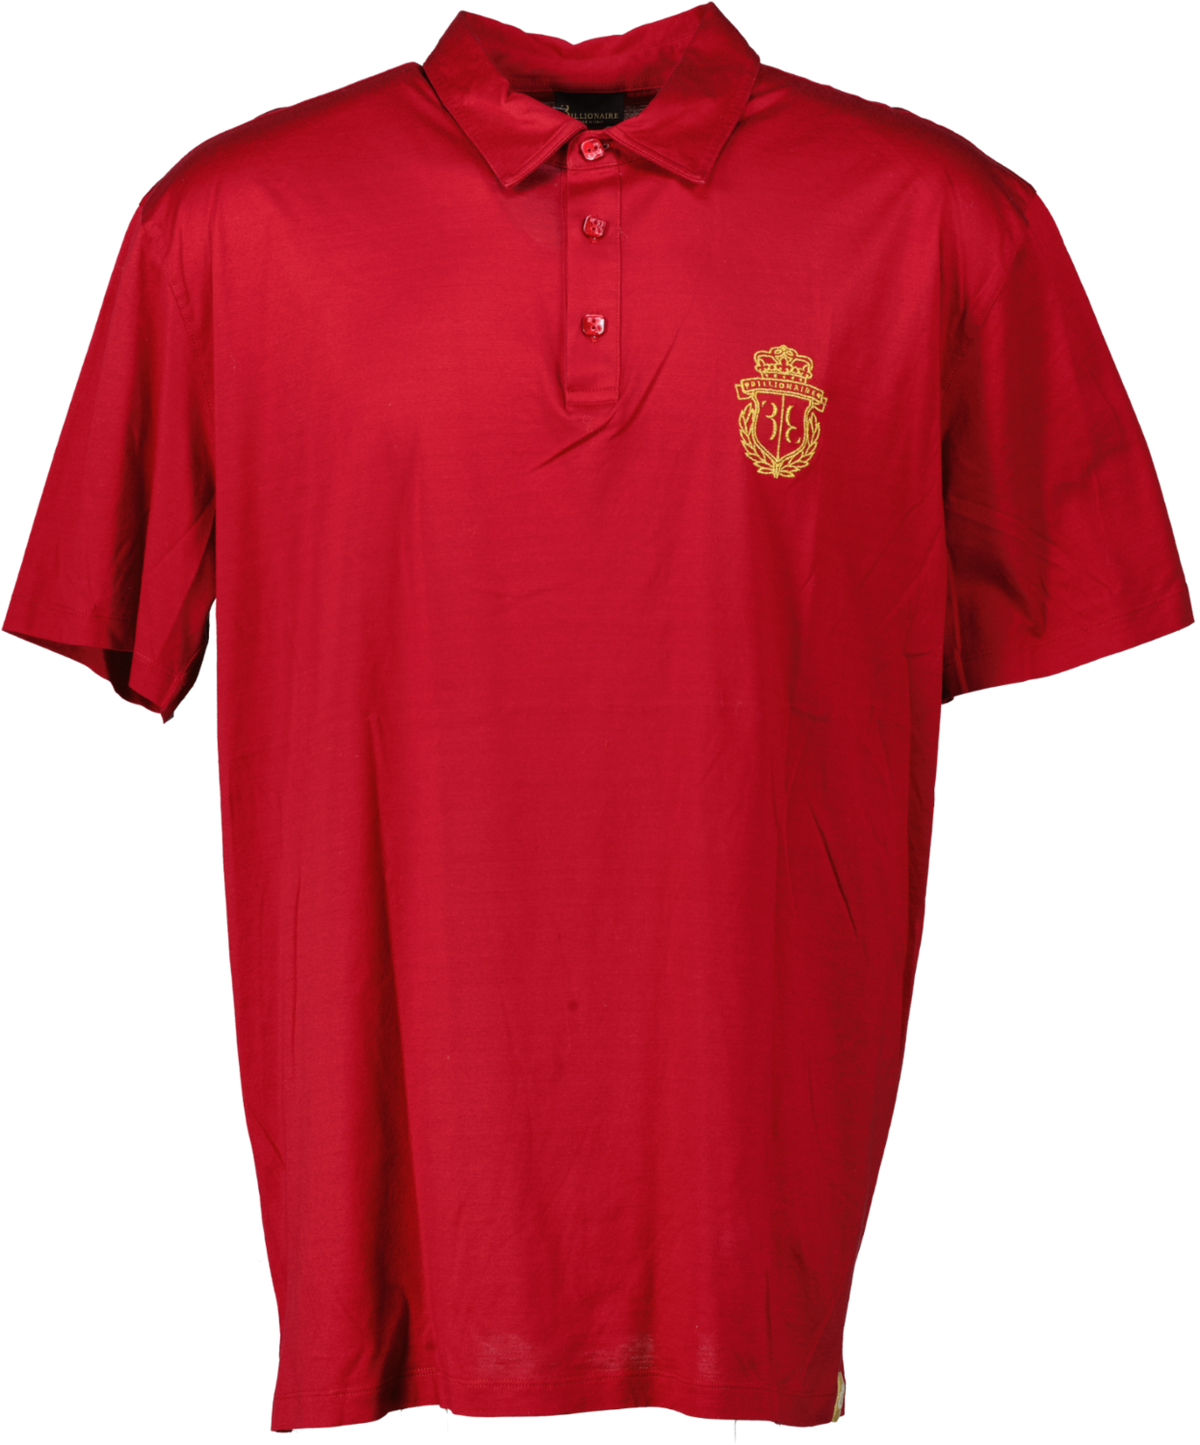 Billionaire Red Fine Jersey Polo Shirt With Gold Embroidered Crest Logo UK 5XL